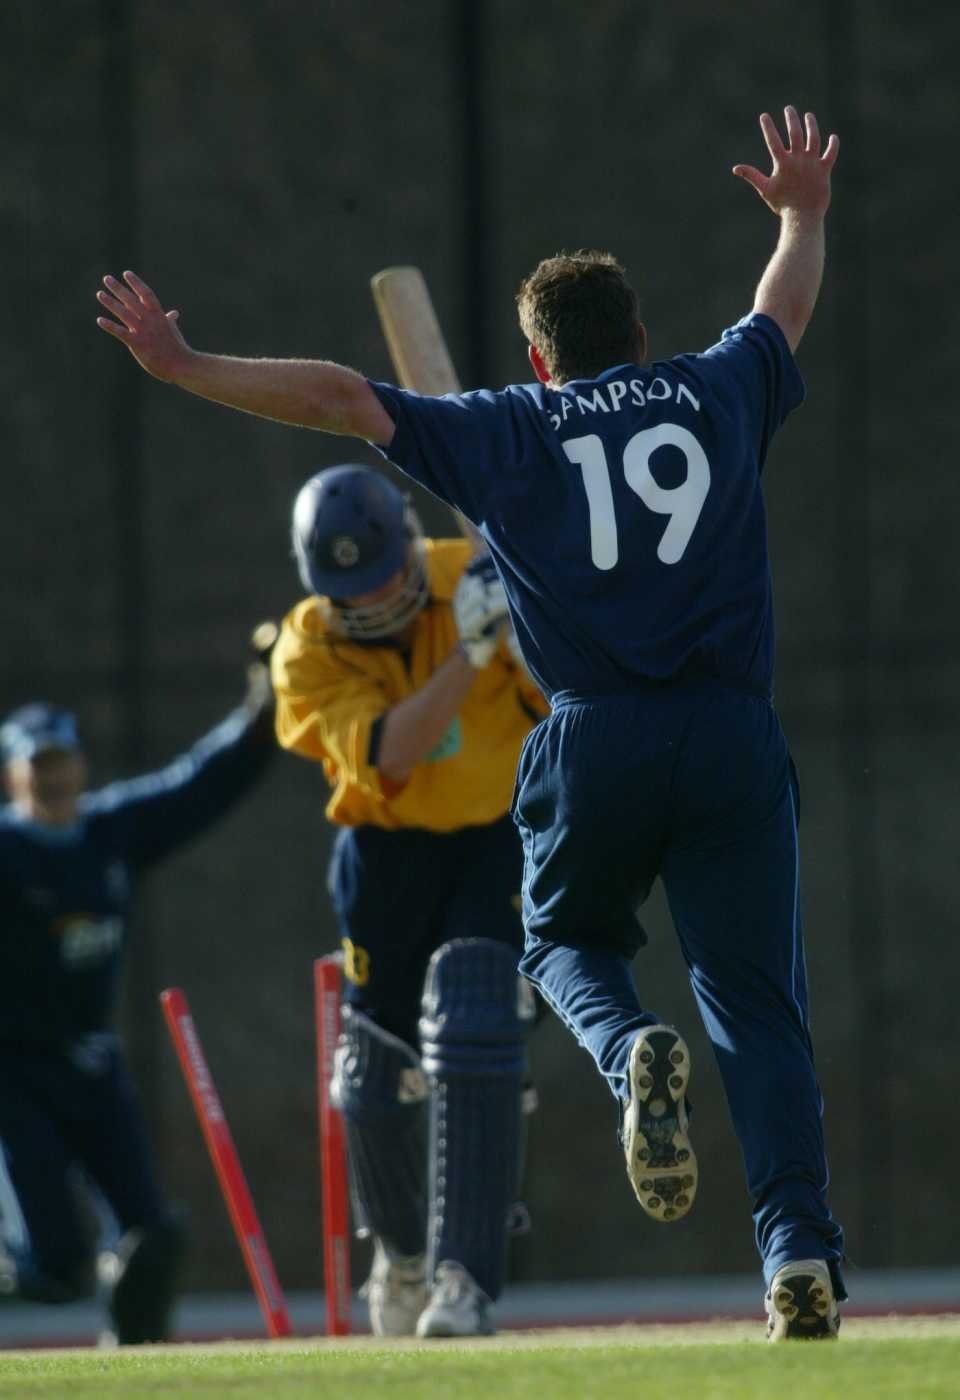 Shane Watson is bowled by Phil Samson for a golden duck